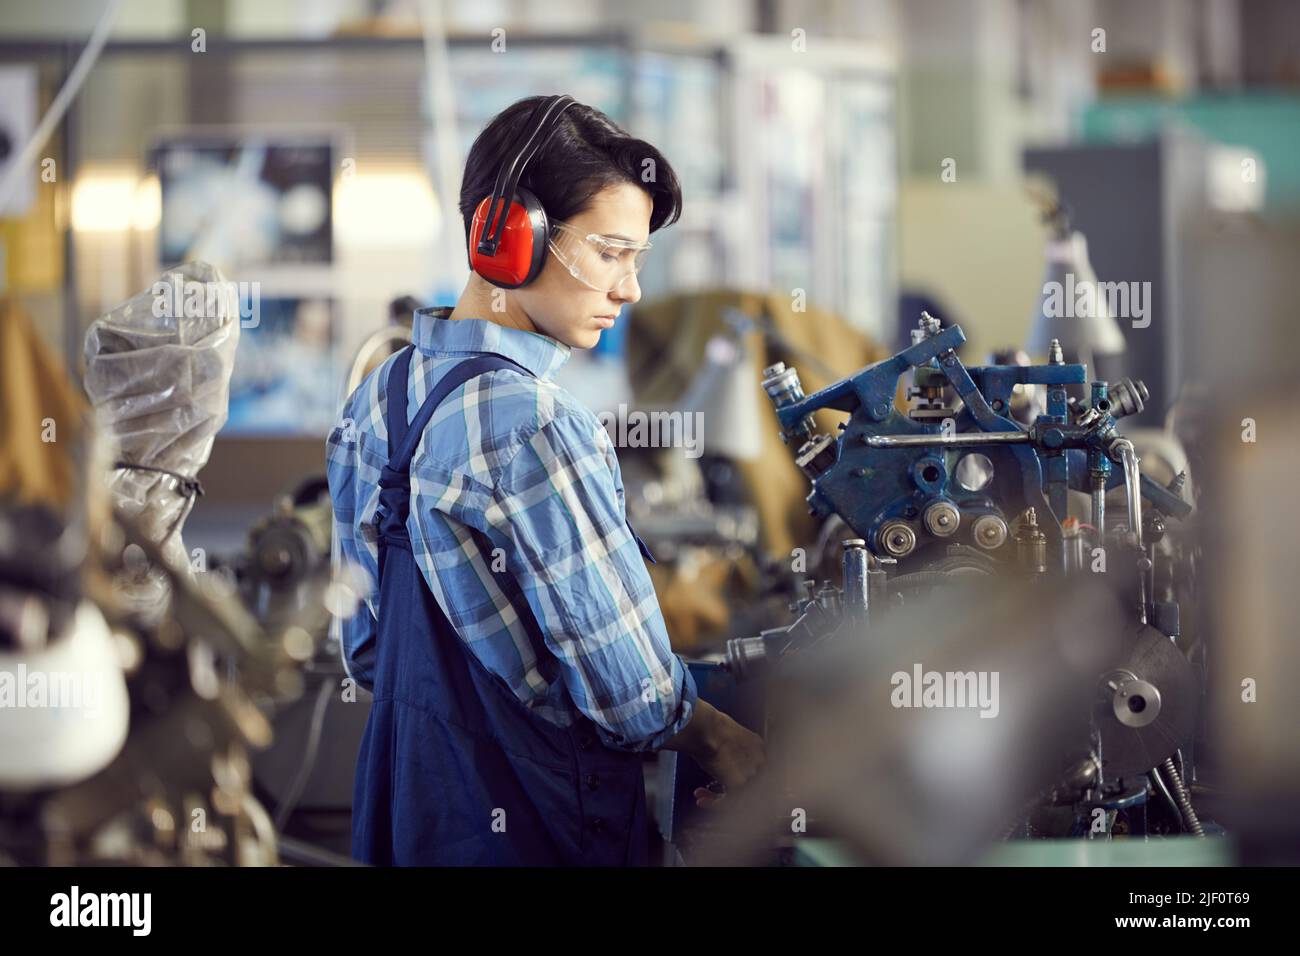 Serious rough girl in overall and ear protectors standing in industrial shop and examining factory machine before work Stock Photo